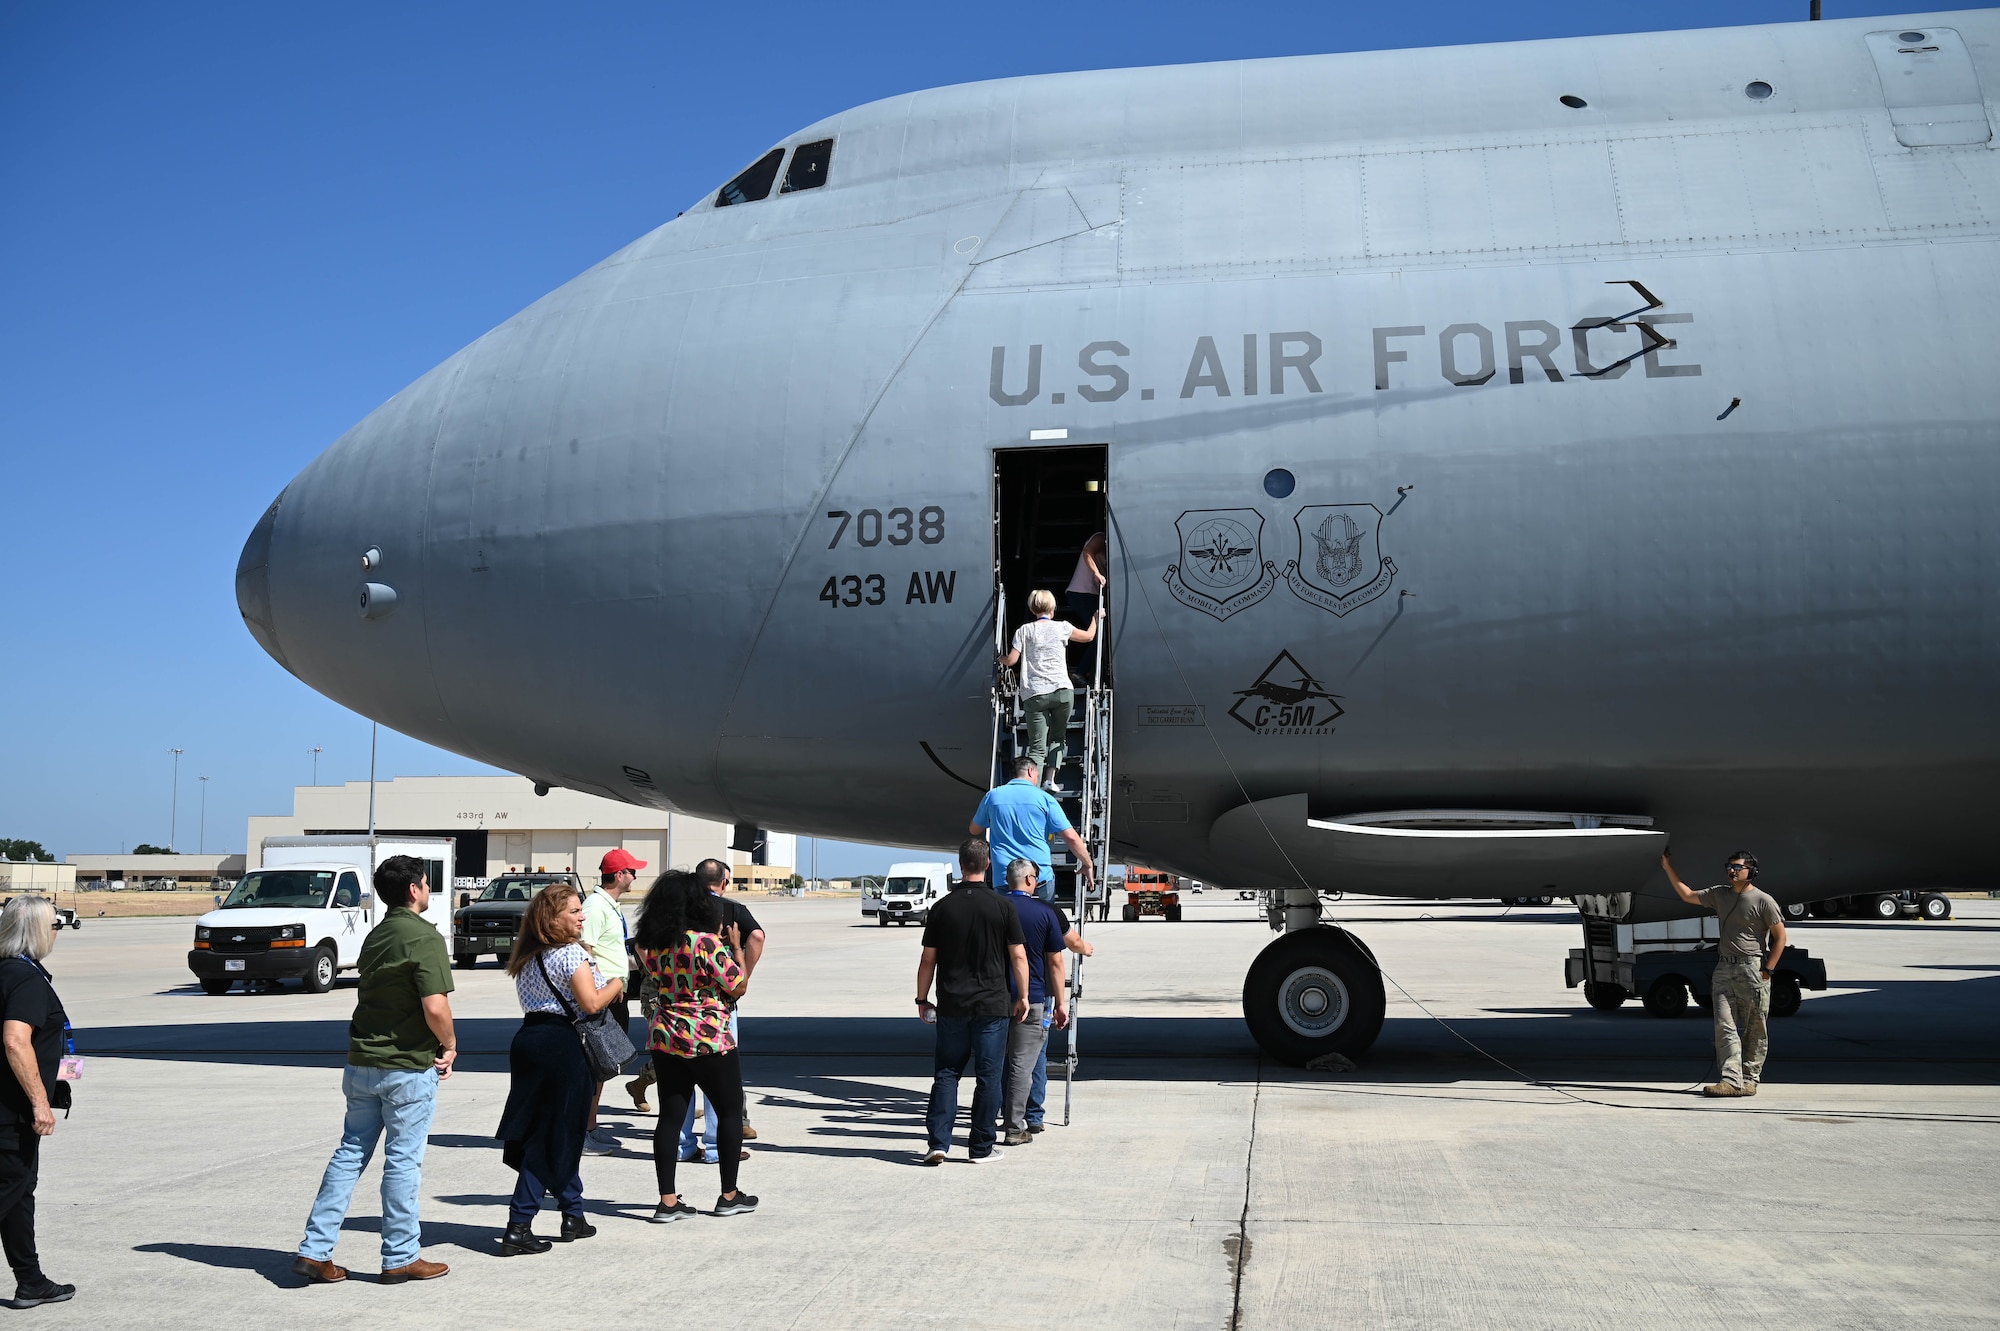 Employers nominated to participate in the Employer Support of the Guard and Reserve Bosslift program board a C-5M Super Galaxy at Joint Base San Antonio-Lackland, Texas on Saturday Aug. 5, 2023. The program, hosted by the 433rd Airlift Wing in conjunction with ESGR, gave civilian employers of Reserve Citizen Airmen an opportunity to see what reservists do during monthly Unit Training Activities. (U.S. Air Force Photo by Julian Hernandez)